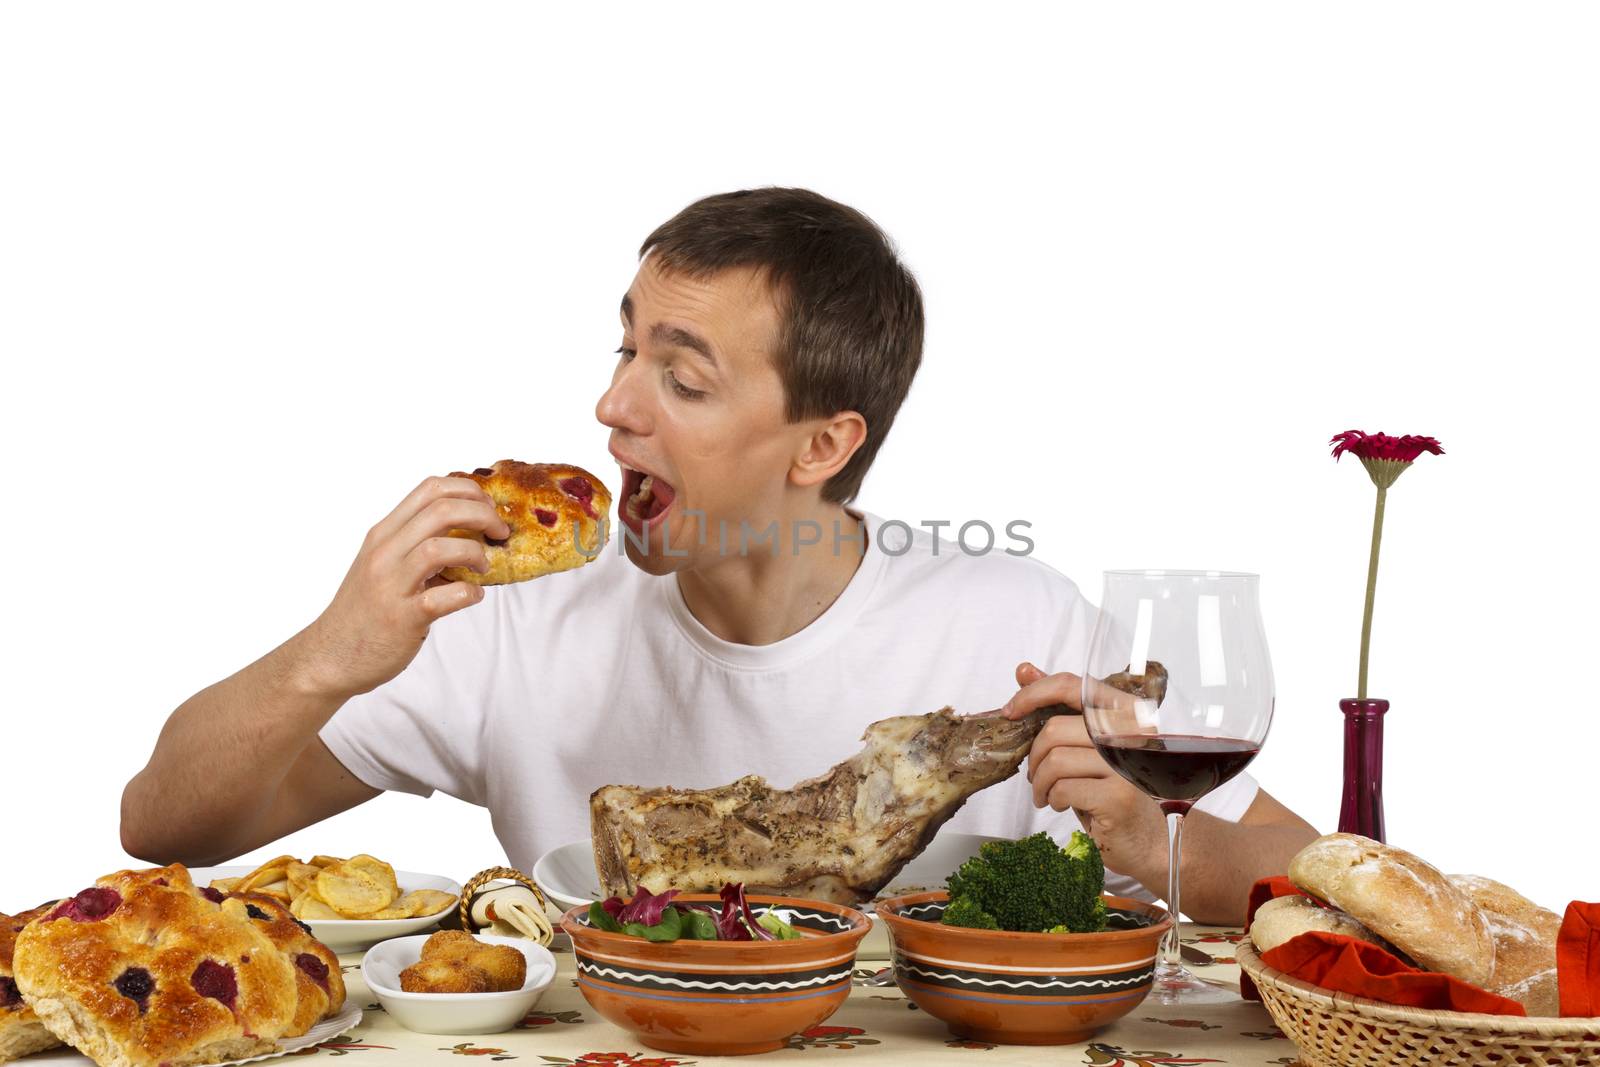 Young man eating a cake while he holds a leg of lamb. Isolated of white background.